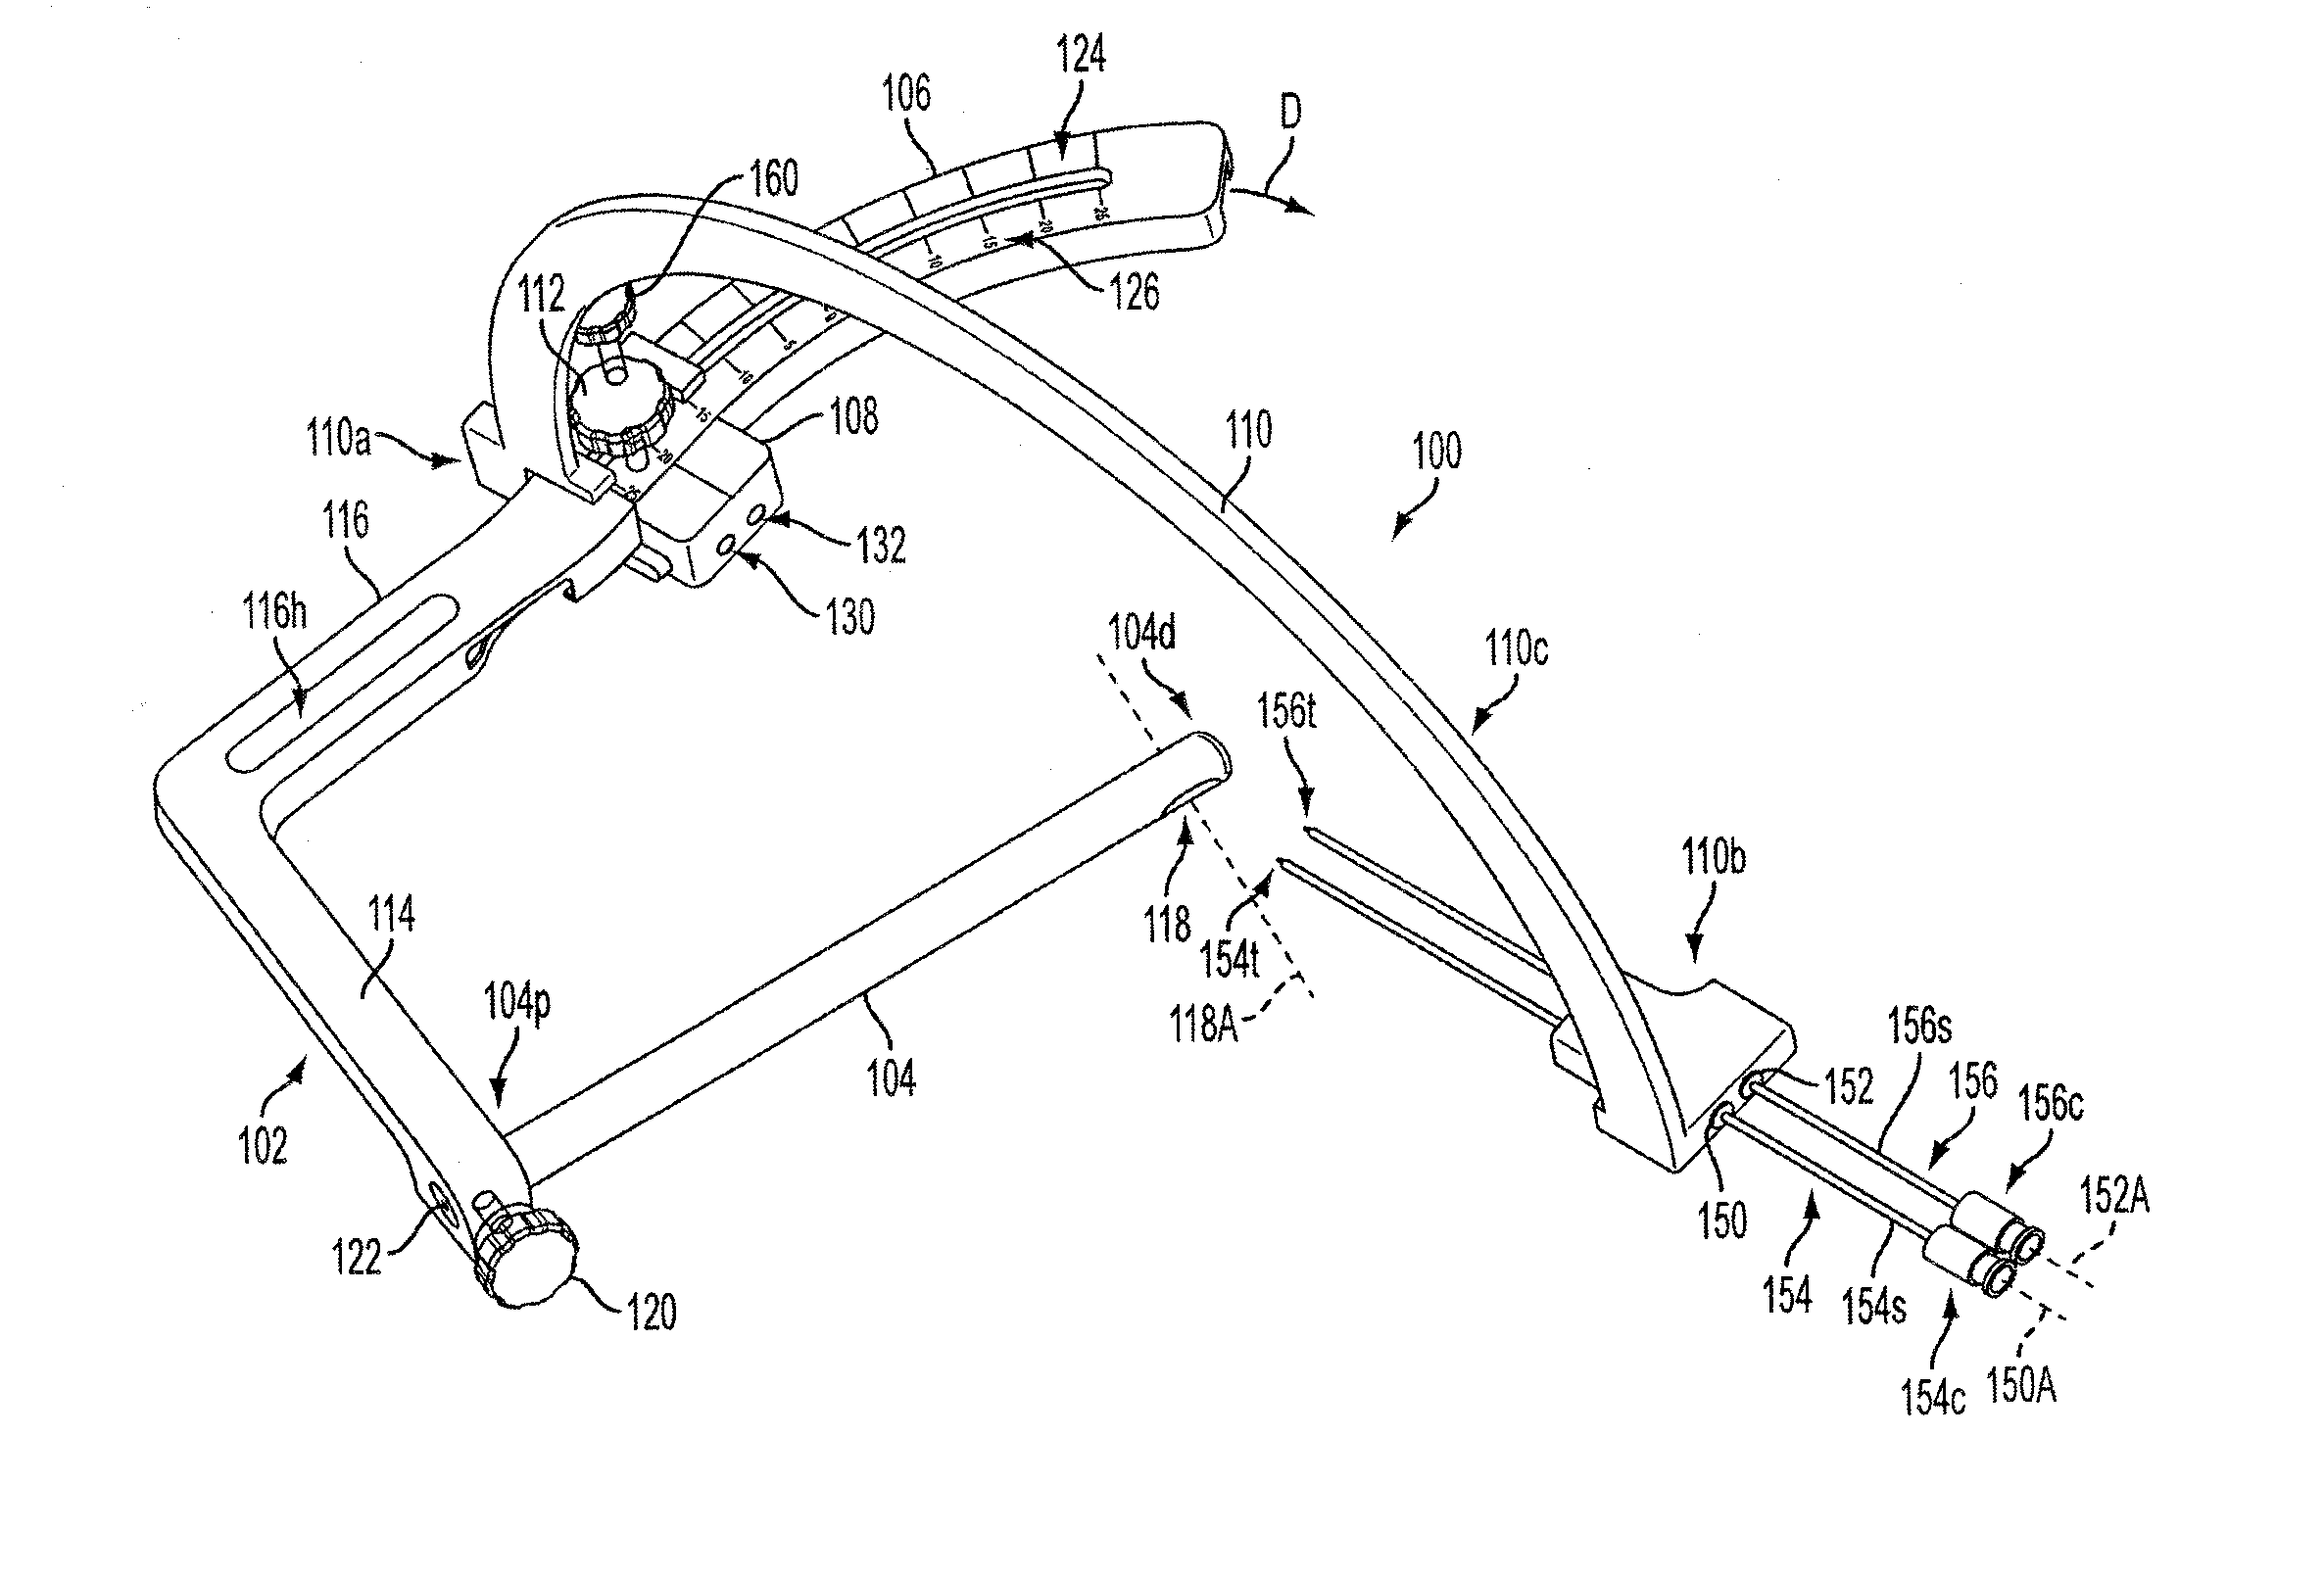 Cross pinning guide devices and methods